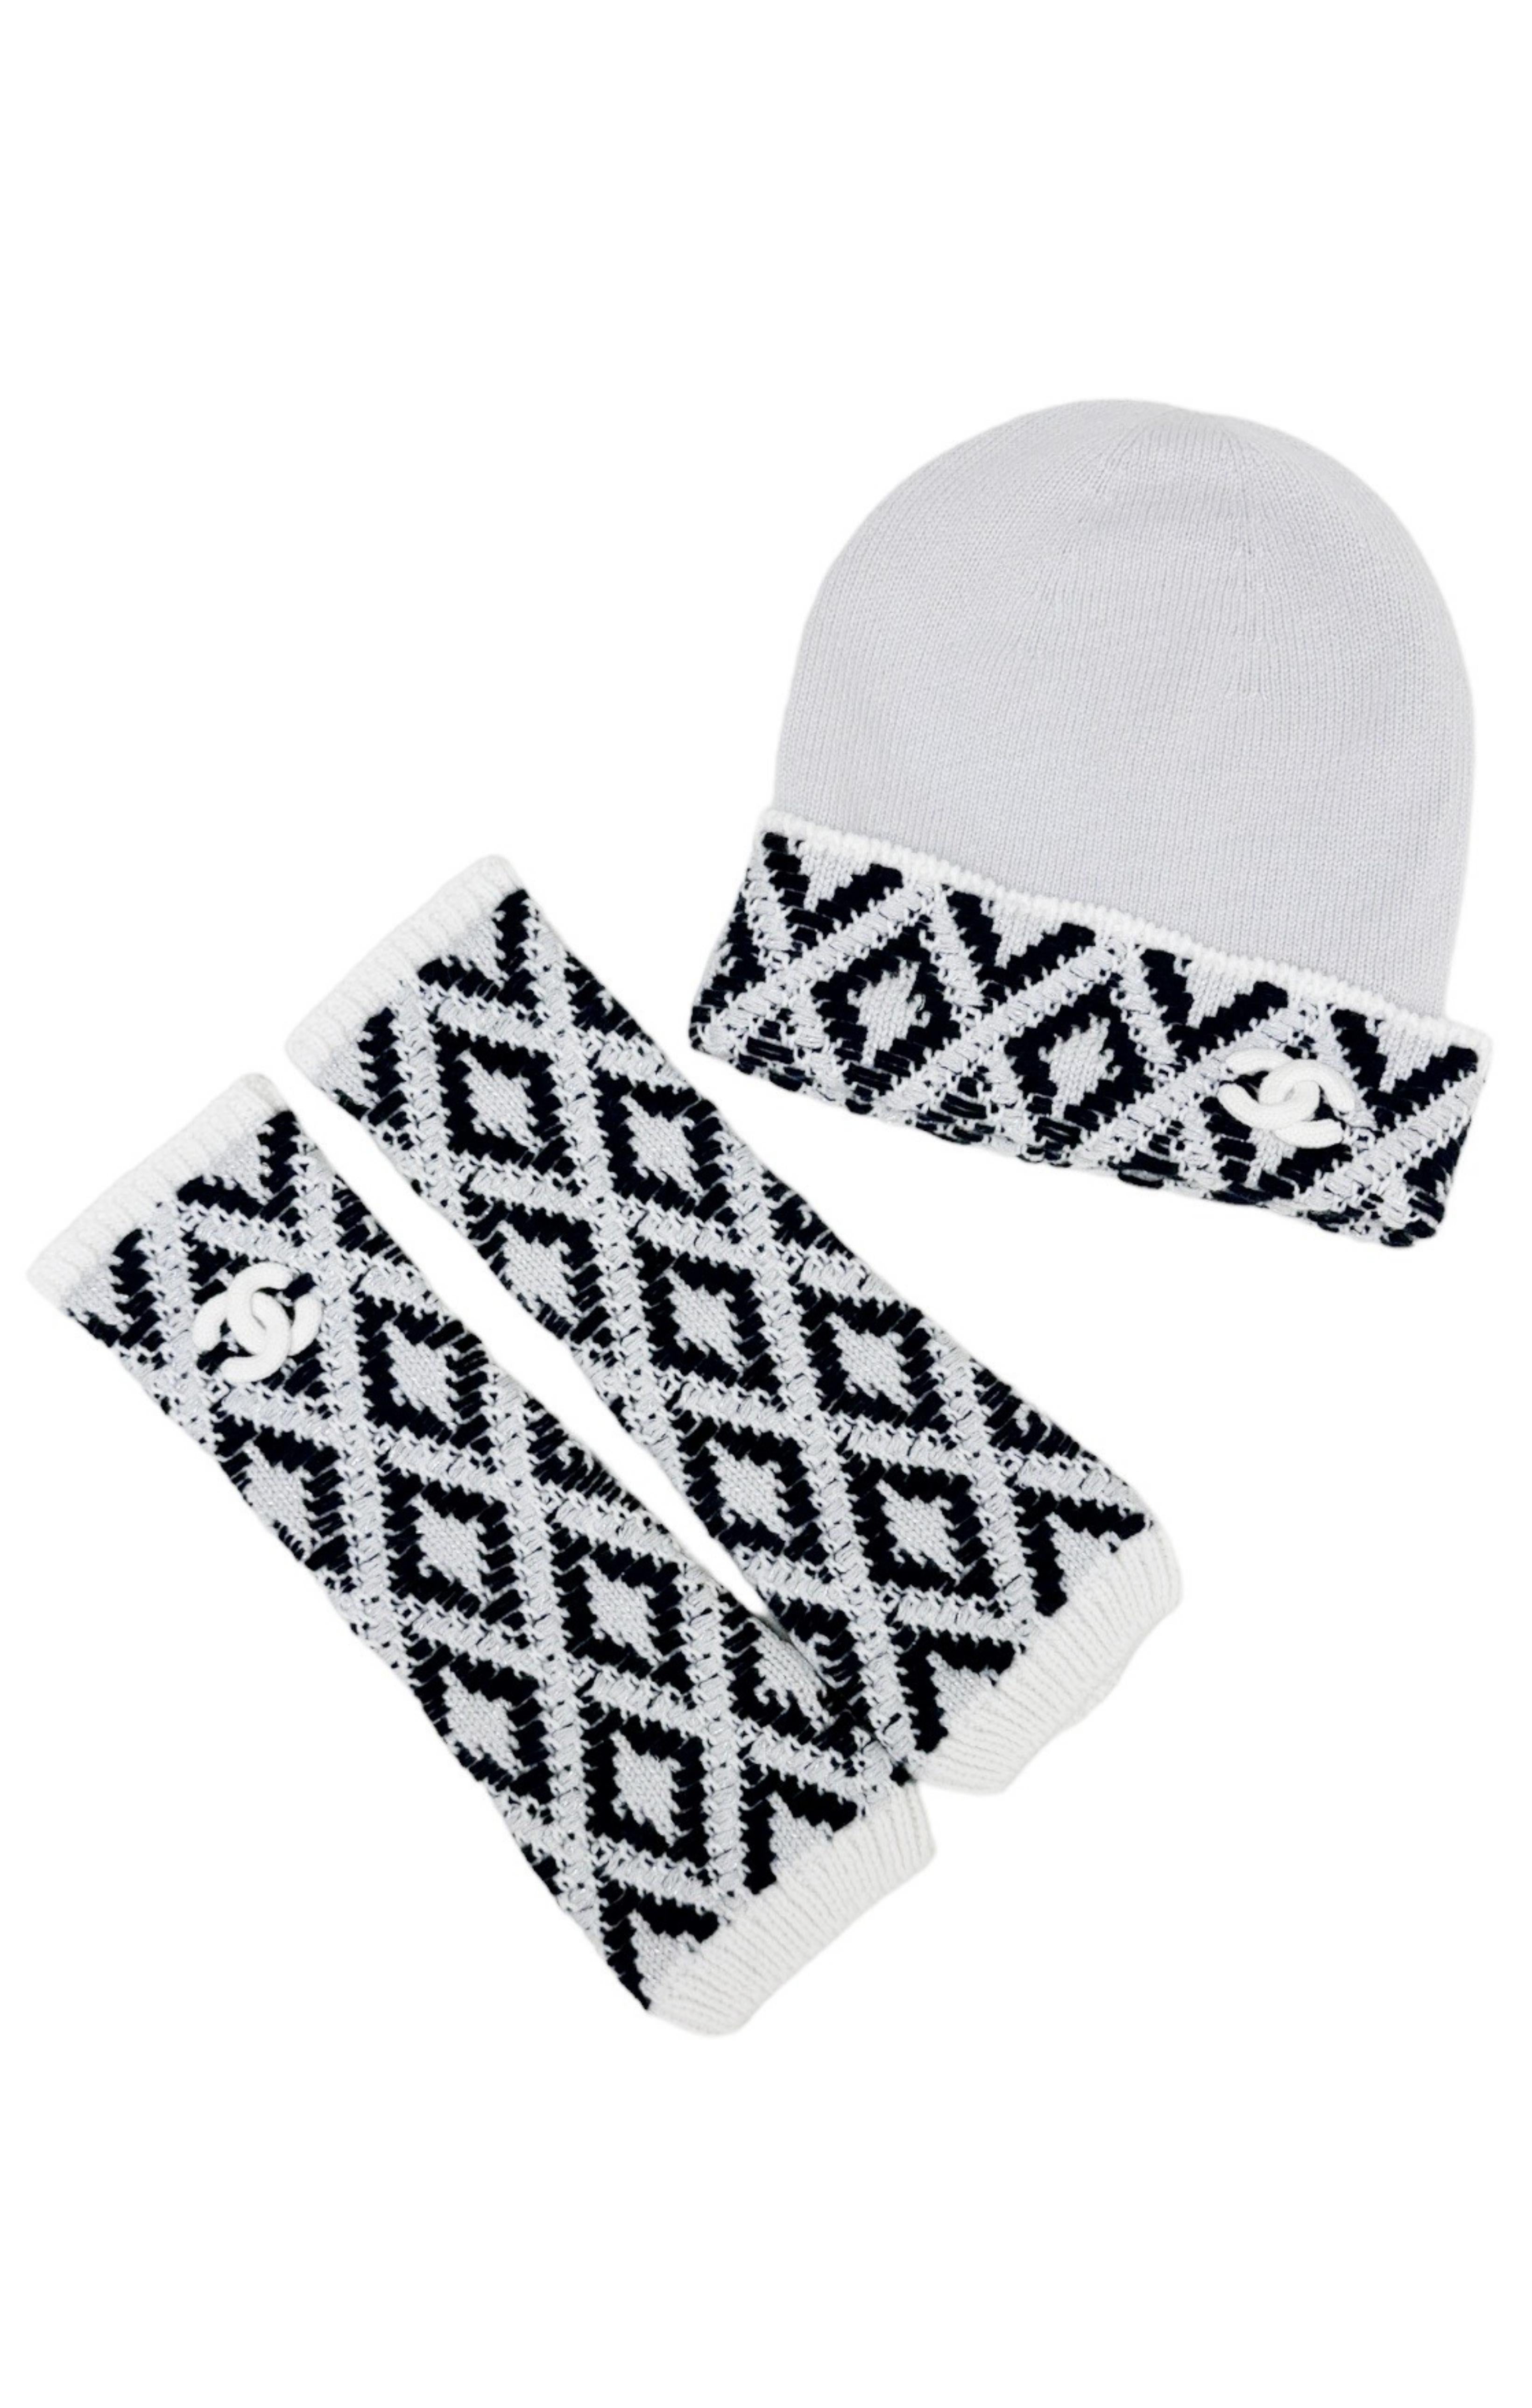 CHANEL (RARE) Hat & Fingerless Gloves Set Size: No size tags, fit like OSFM